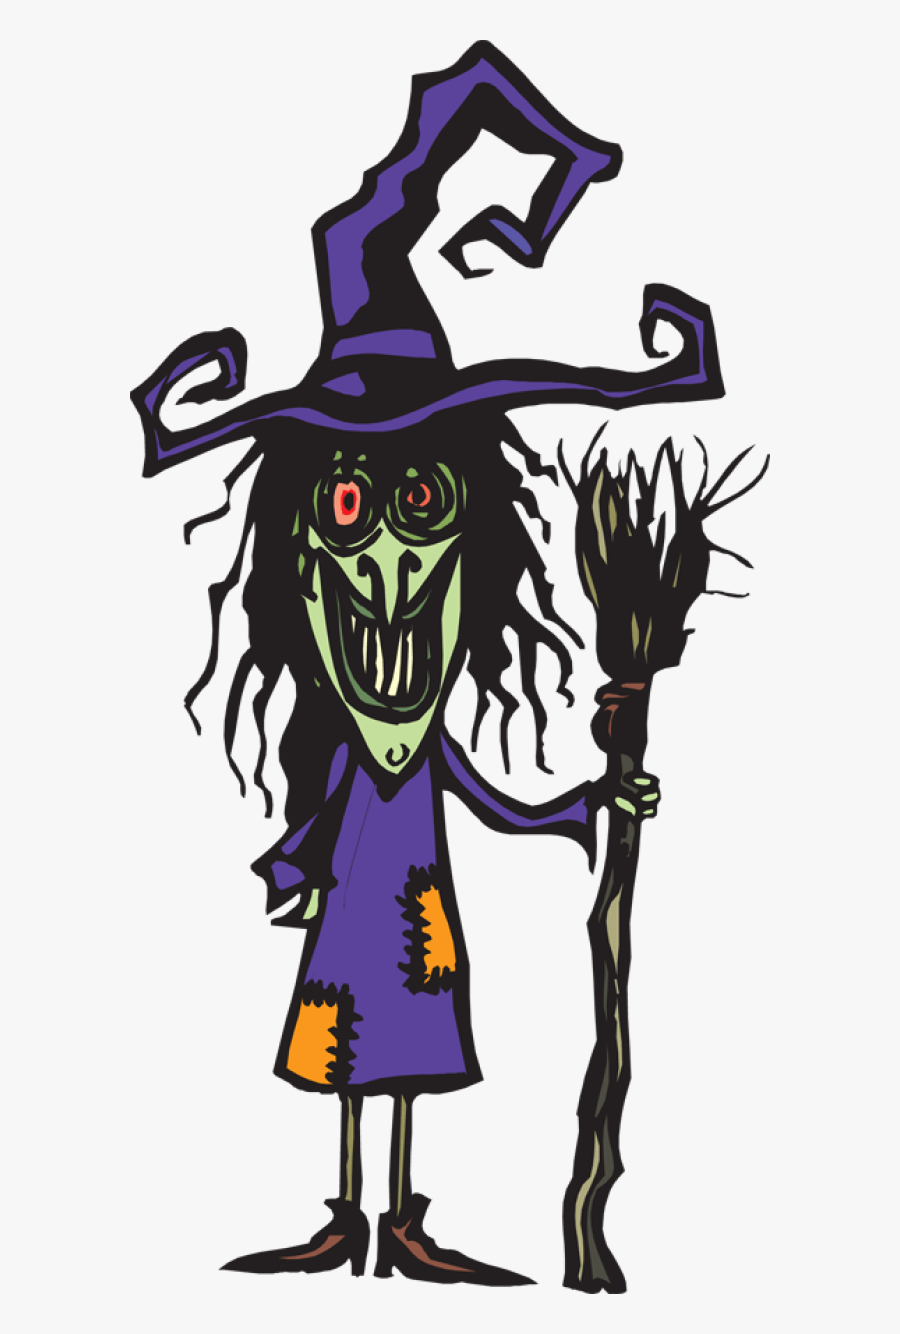 Pictures Of Ugly Witches - Ugly Witch Clipart, Transparent Clipart